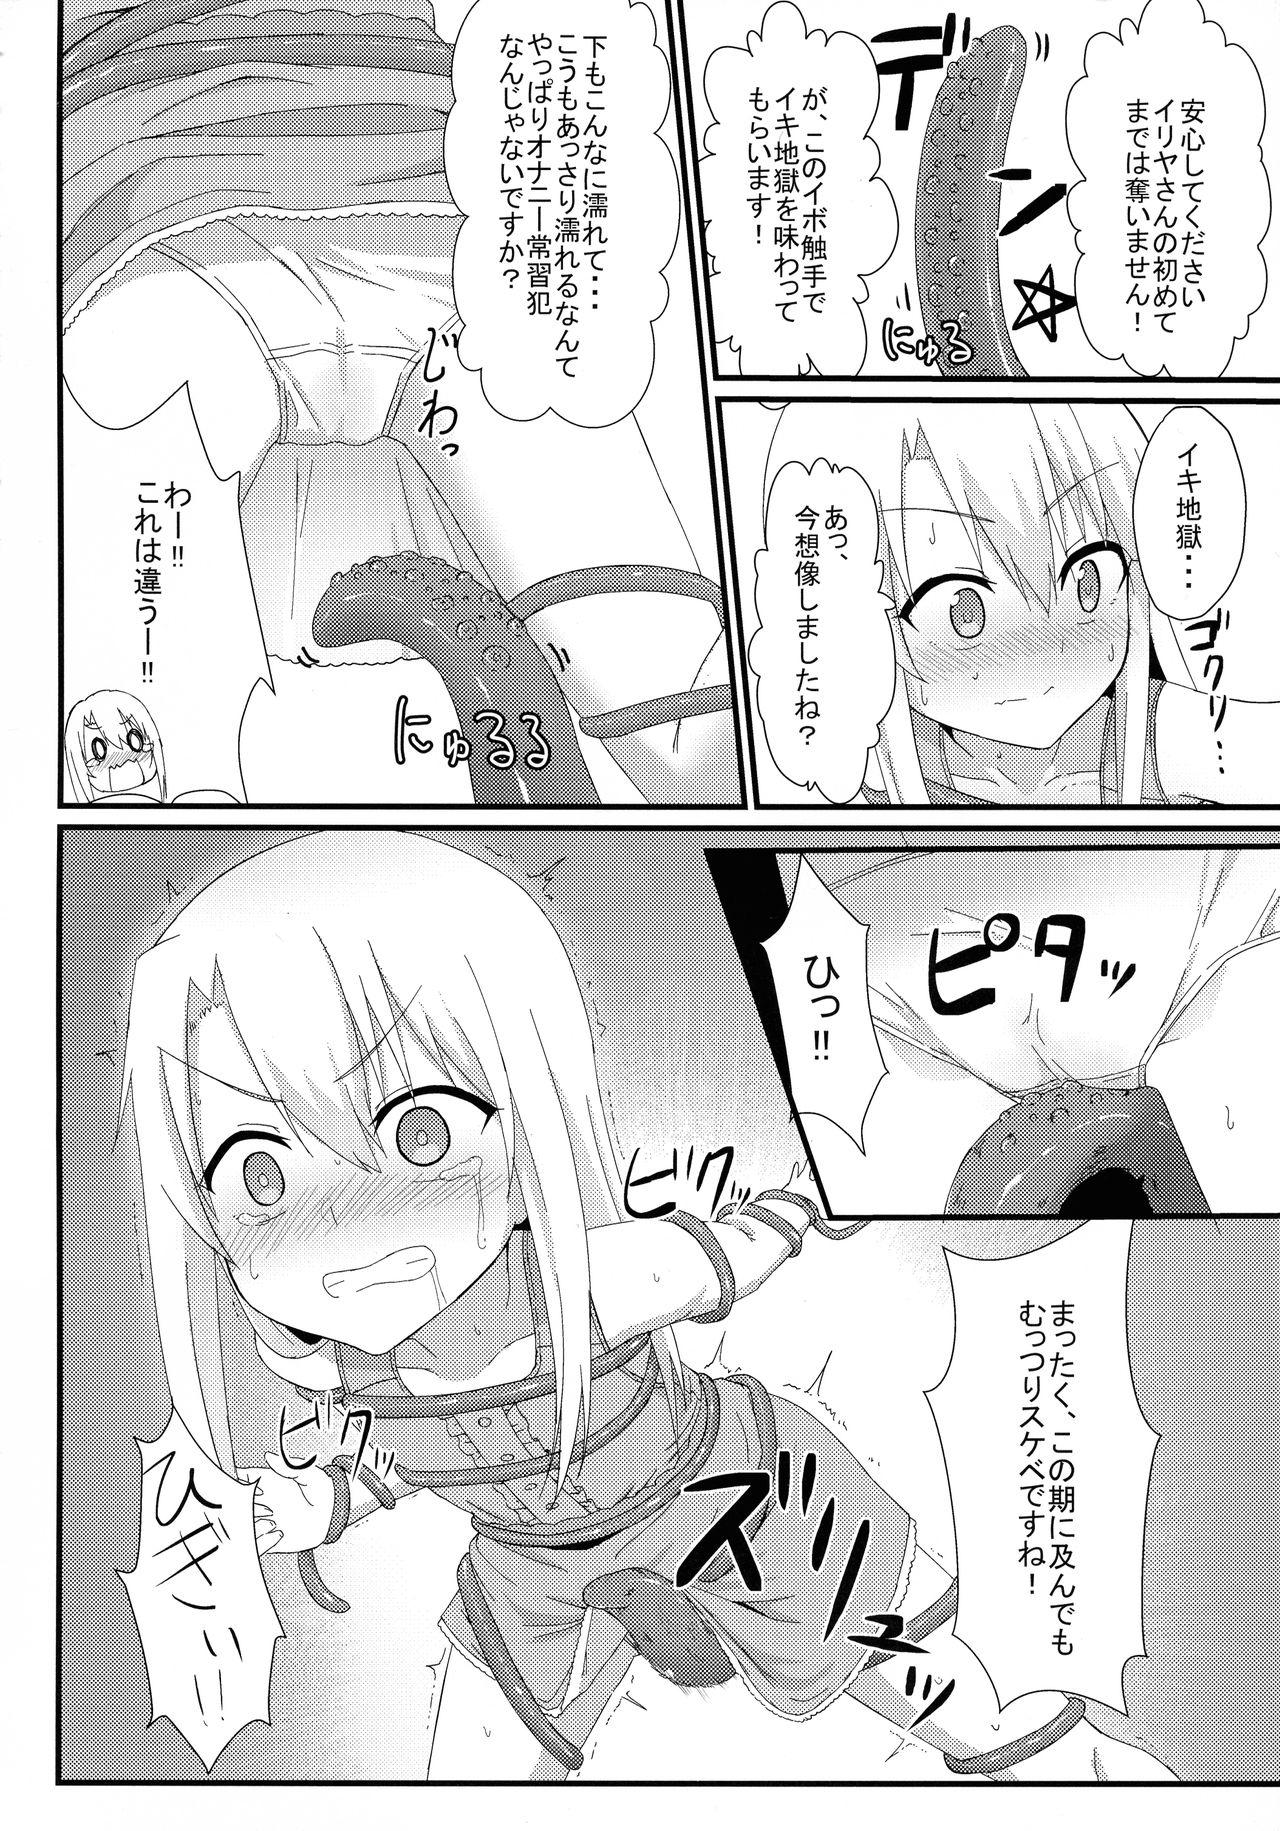 Adolescente Illya to Ruby Etchi Etchi Secret Function - Fate kaleid liner prisma illya Ass - Page 6